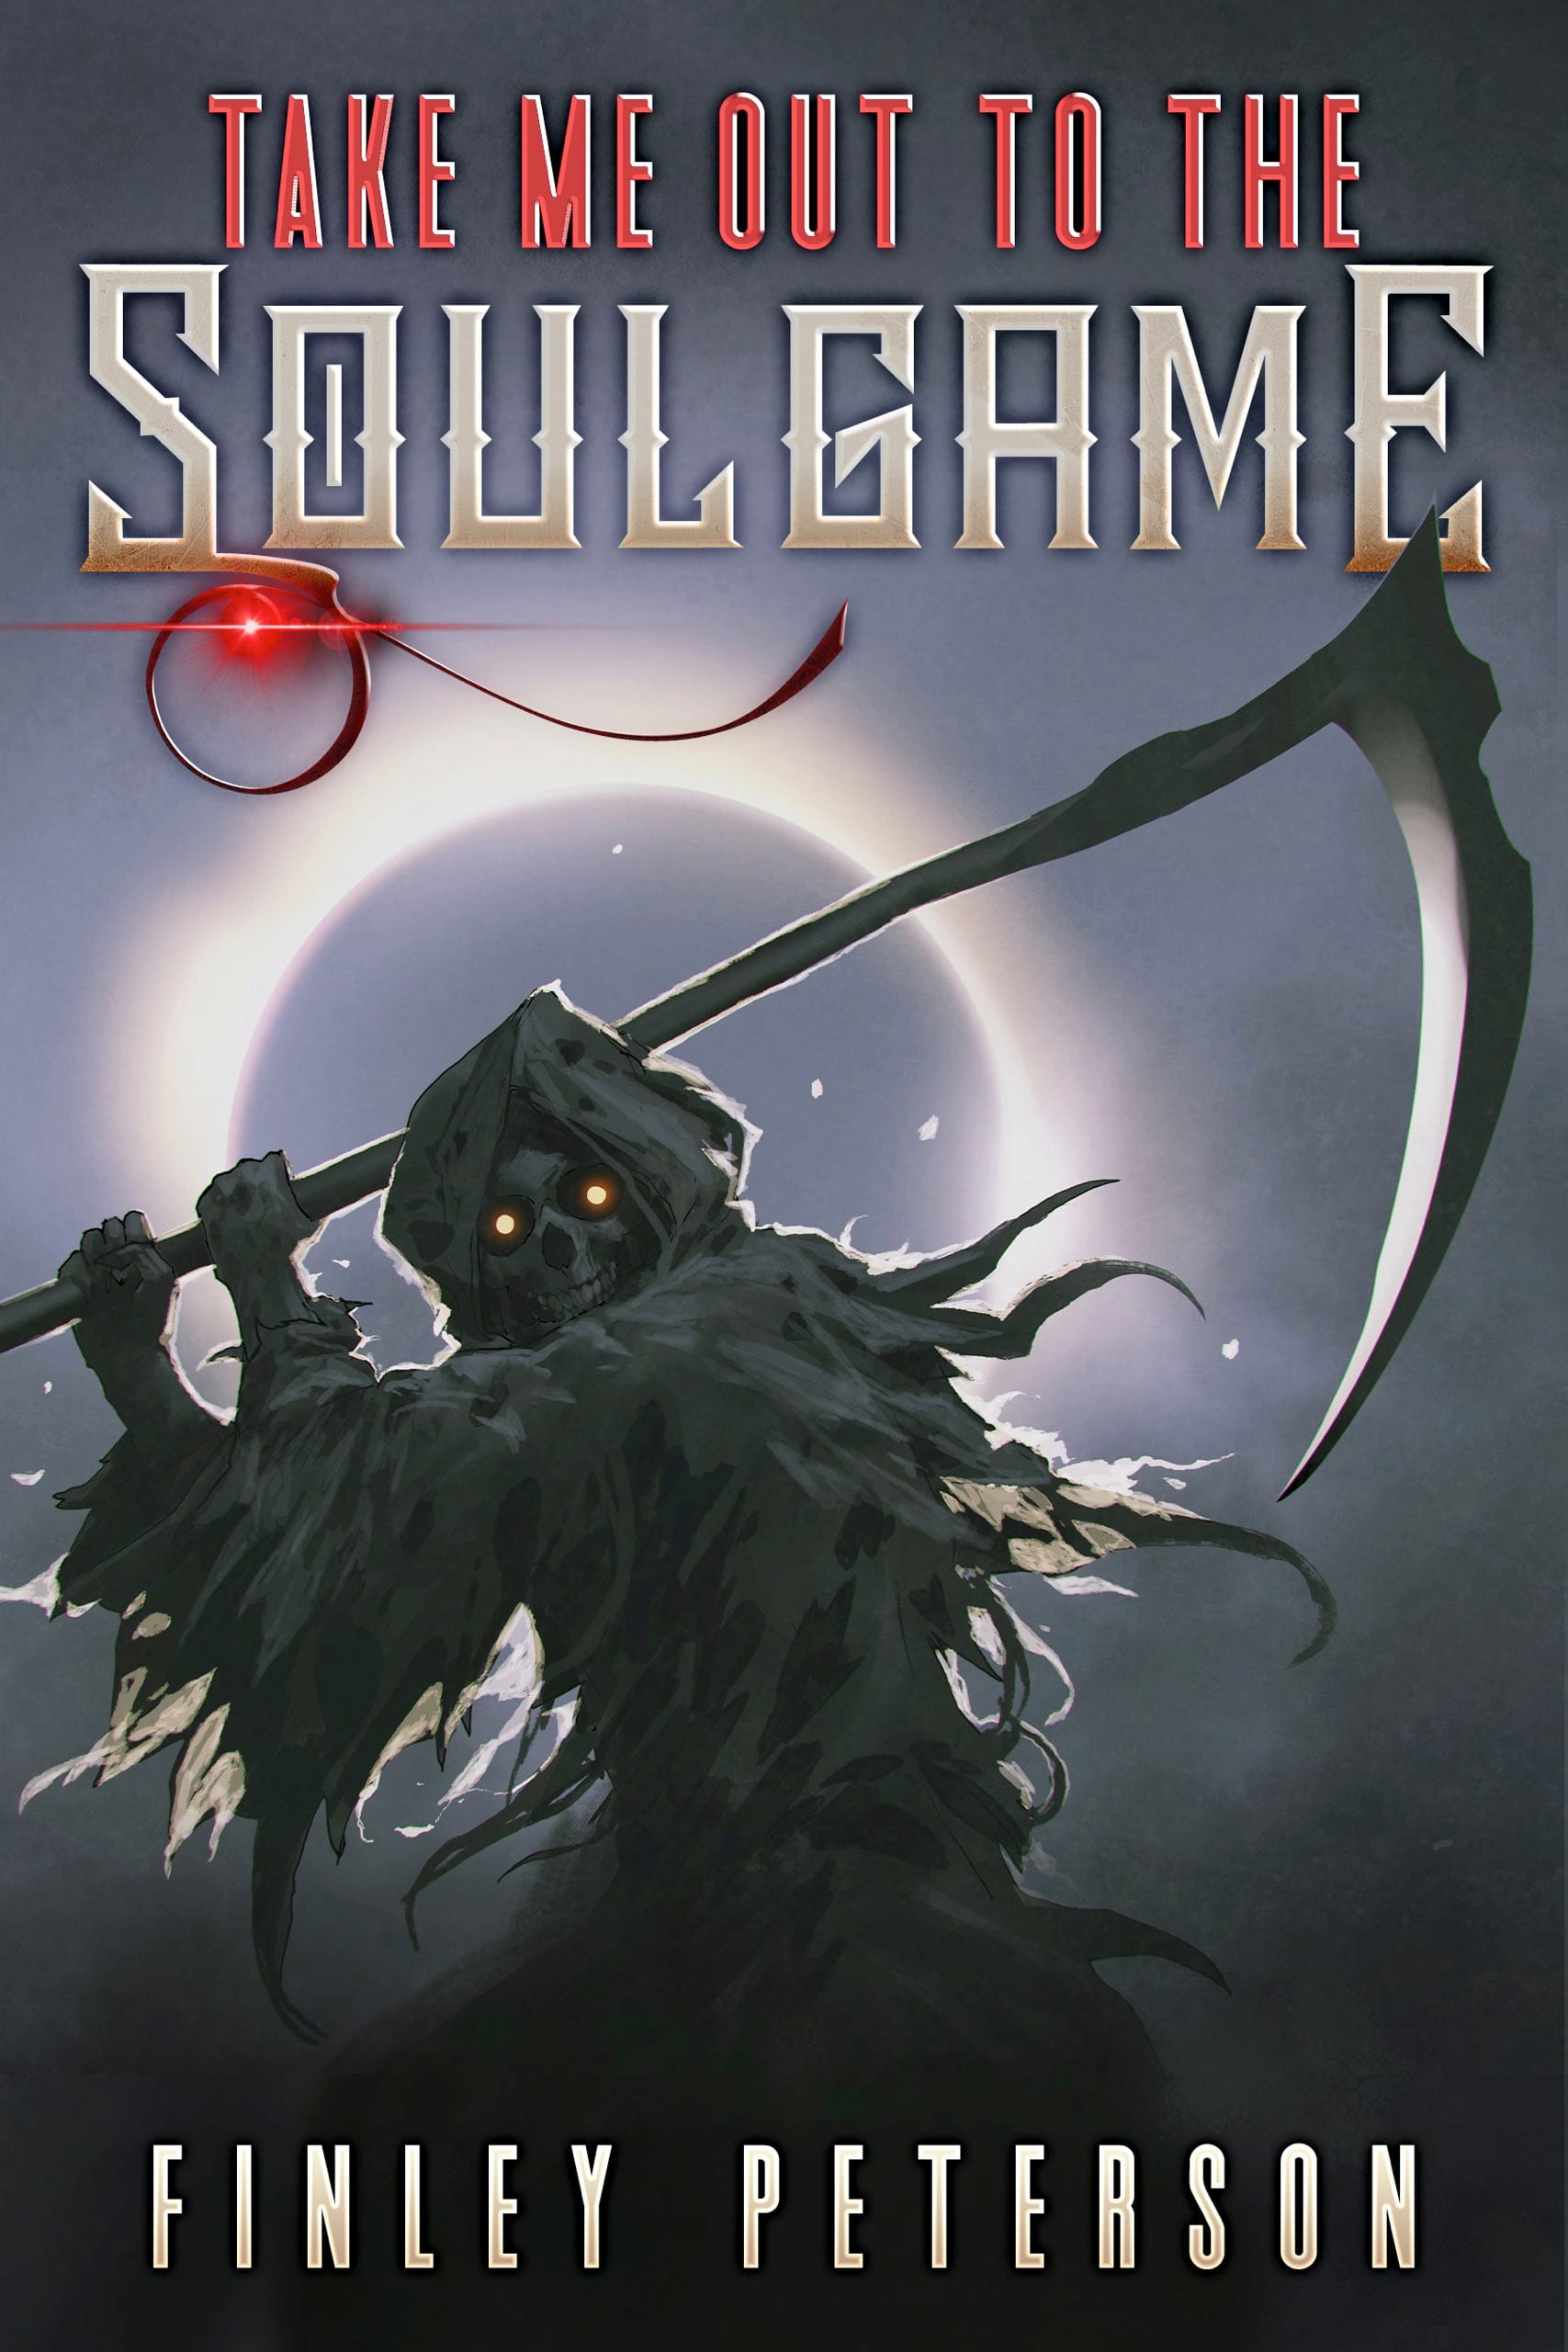 The cover for "Take Me Out to the Soulgame" featuring a grim reaper wielding a scythe like a baseball bat.